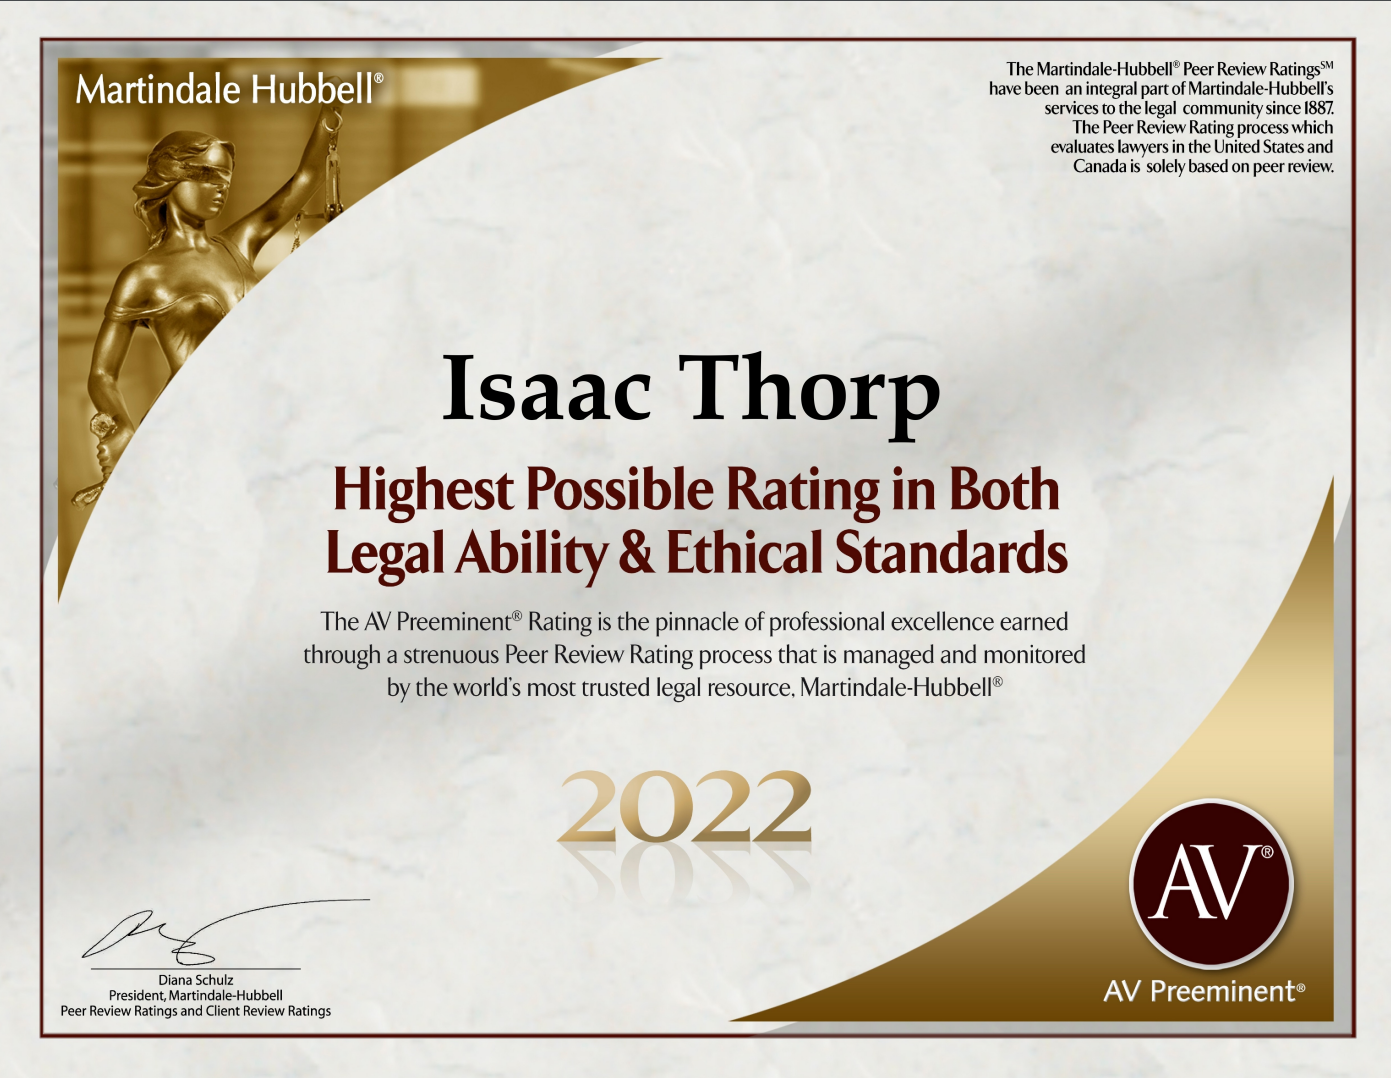 Isaac Thorp Highest Possible Rating in Both Legal Liability & Ethical Standards